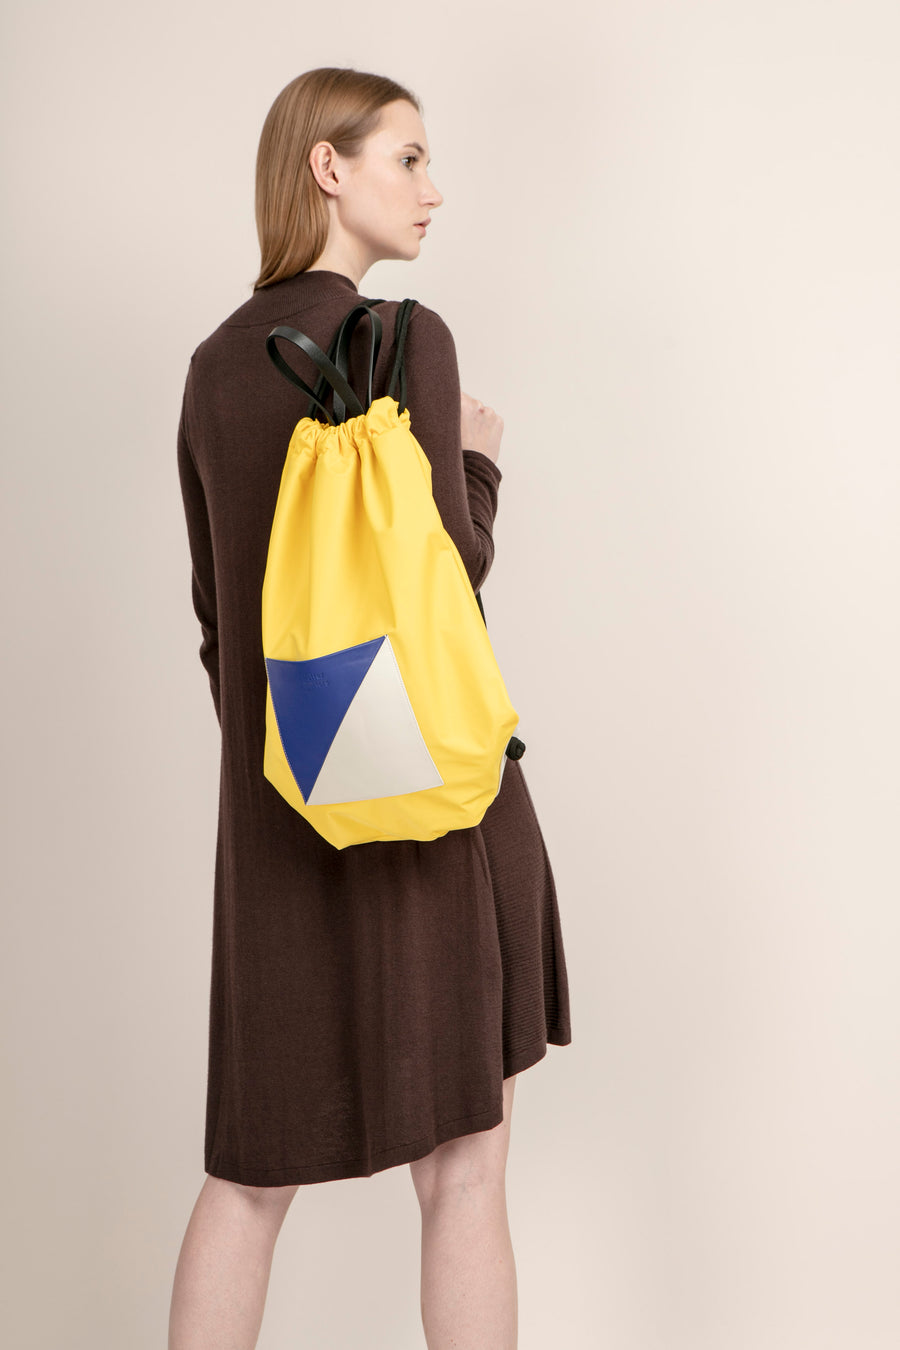 The Square / Drawstring Backpack • Yellow